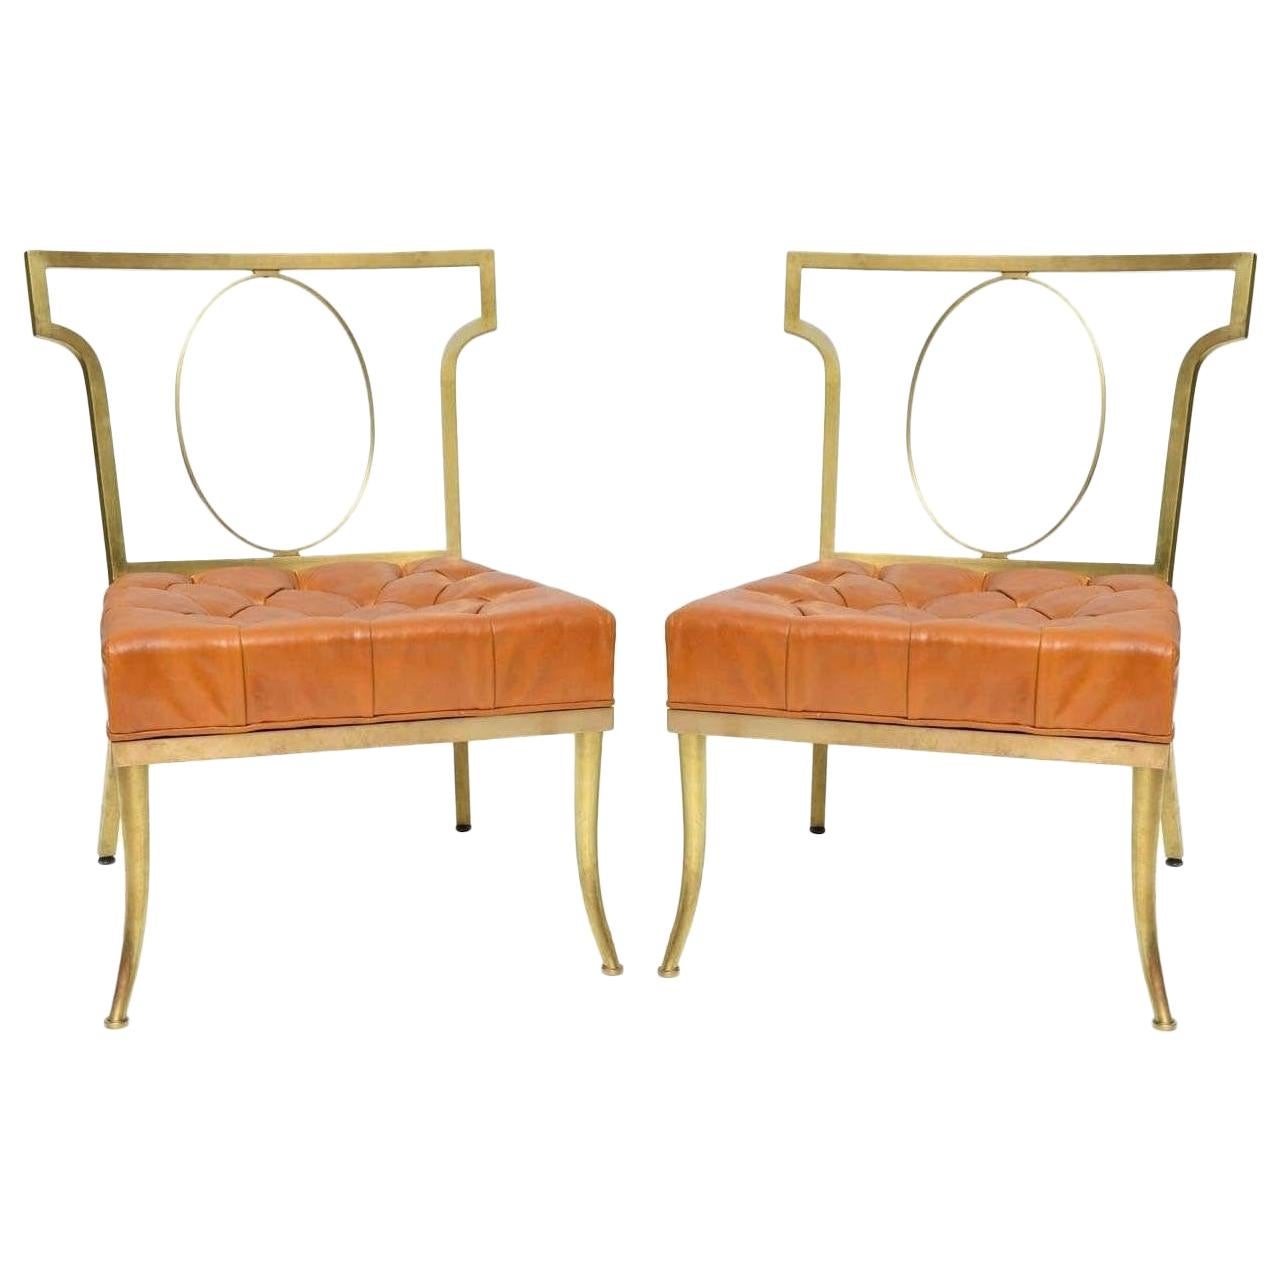 William "Billy" Haines Brass and Orange Leather Chairs